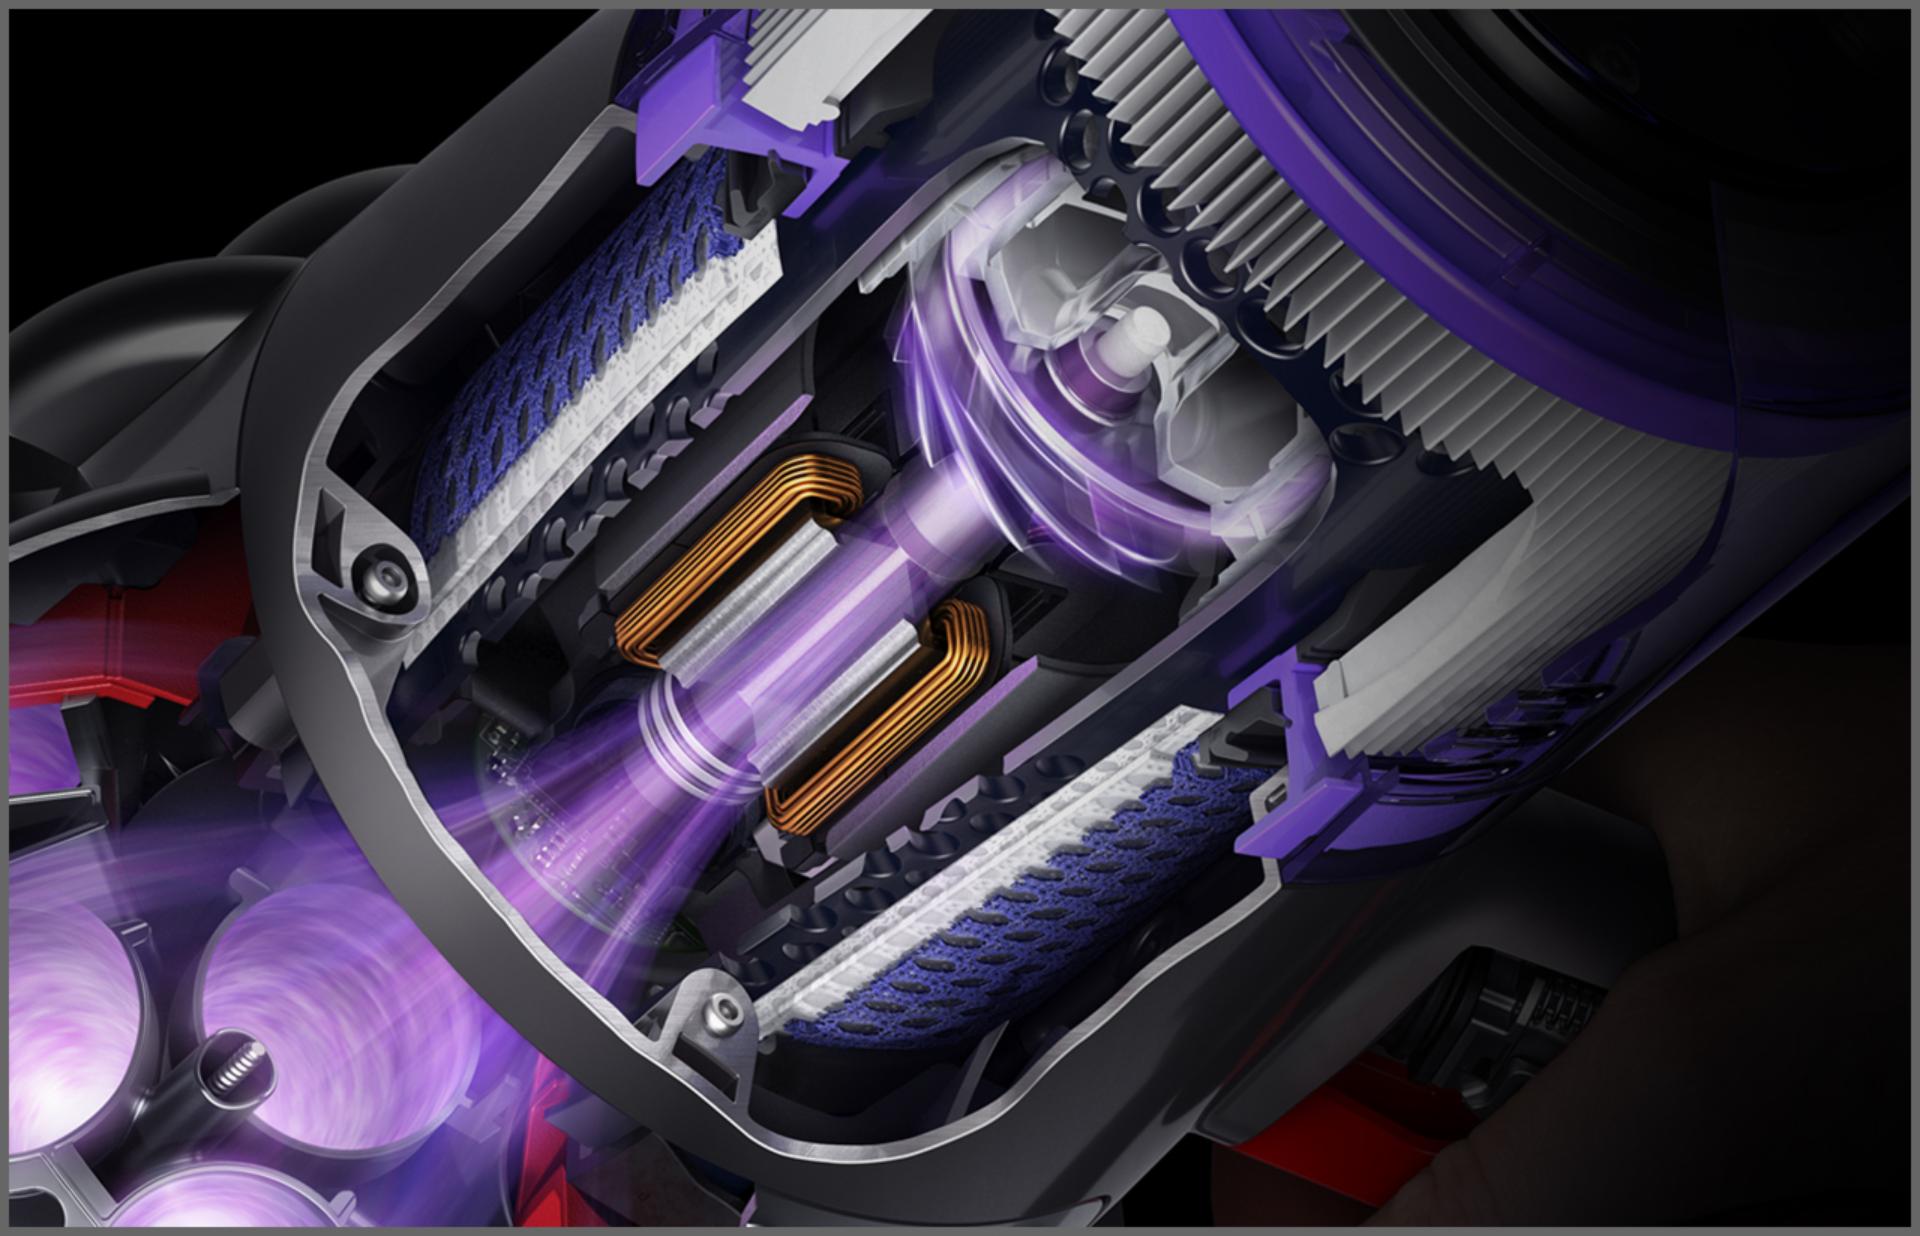 The technology behind the Dyson V11™ vacuum